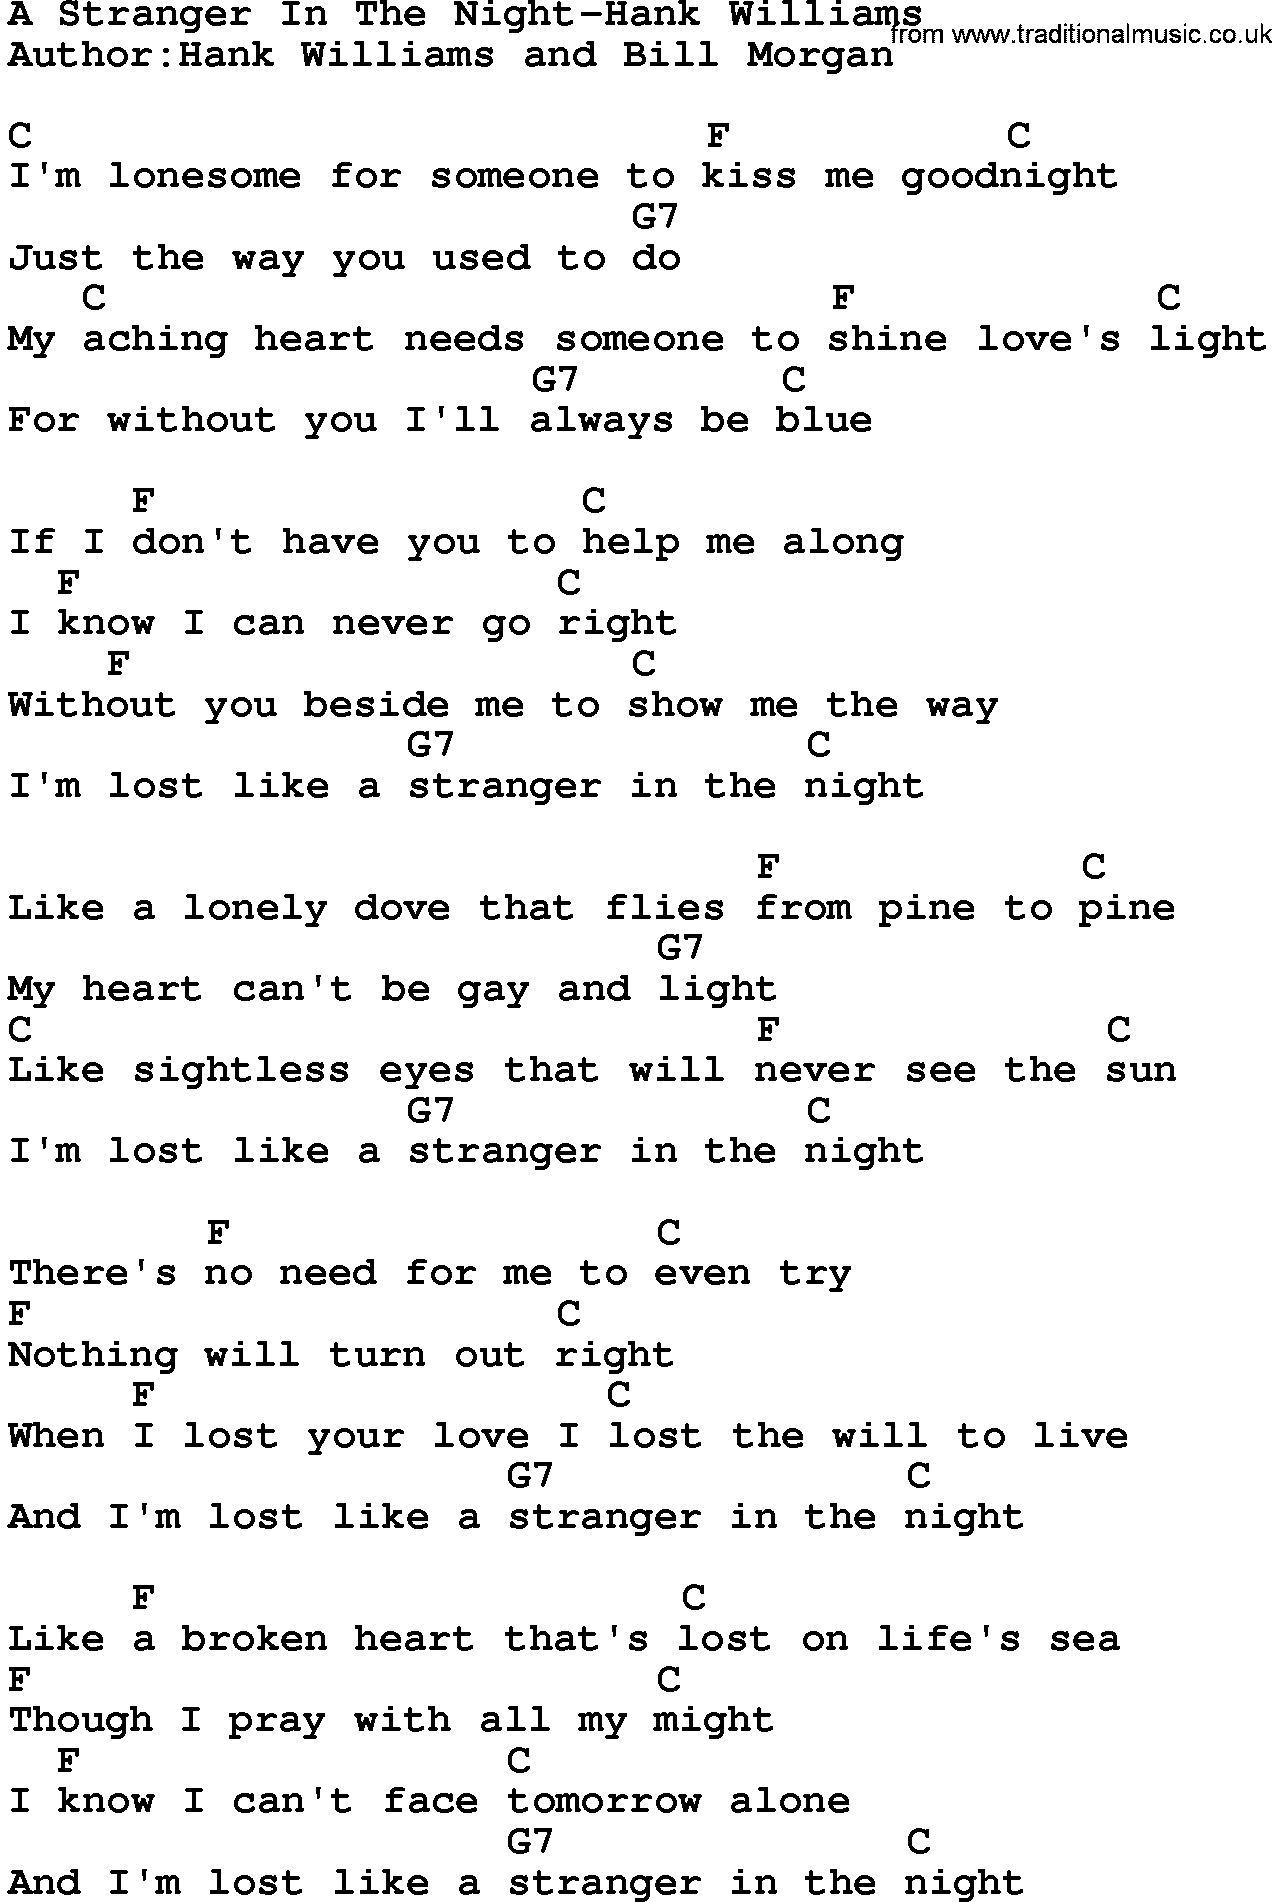 Country music song: A Stranger In The Night-Hank Williams lyrics and chords